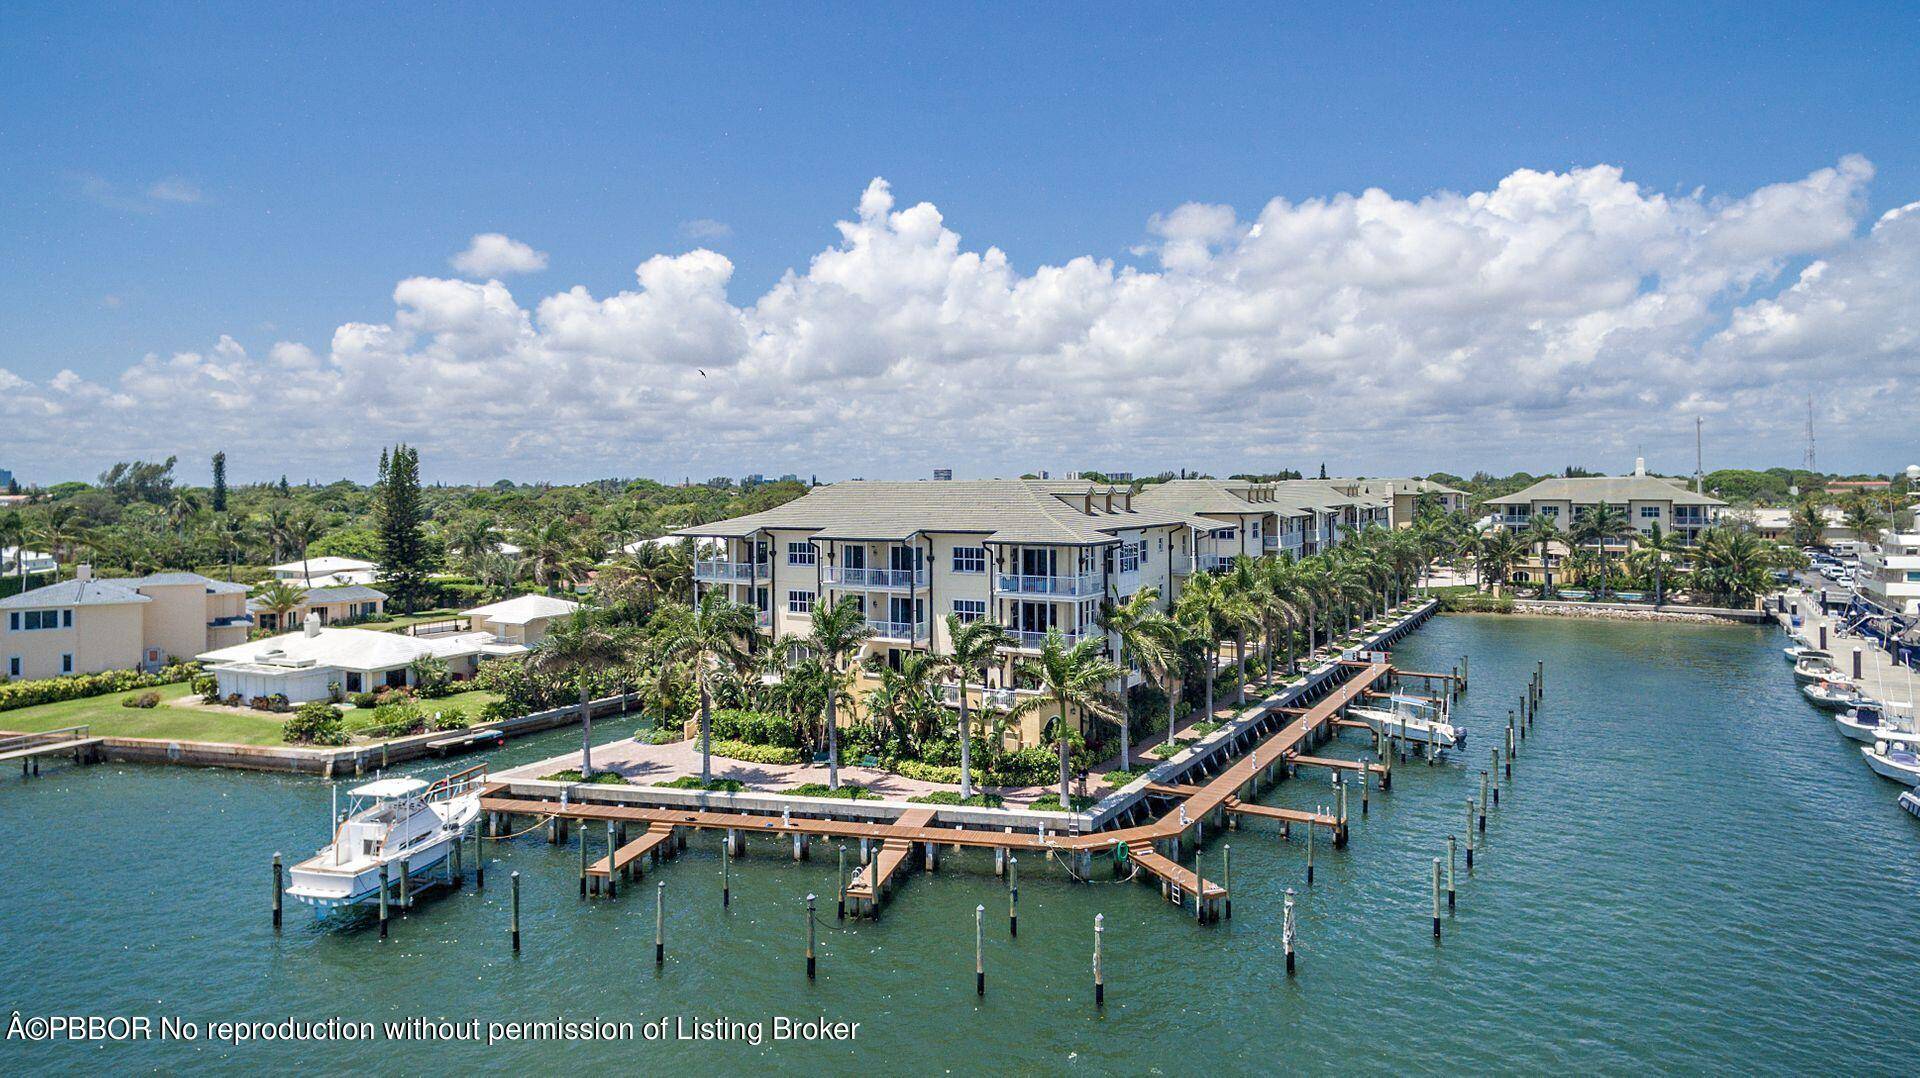 Enjoy the breathtaking Intracoastal water and mega yacht views from this fabulous 3bd 2.